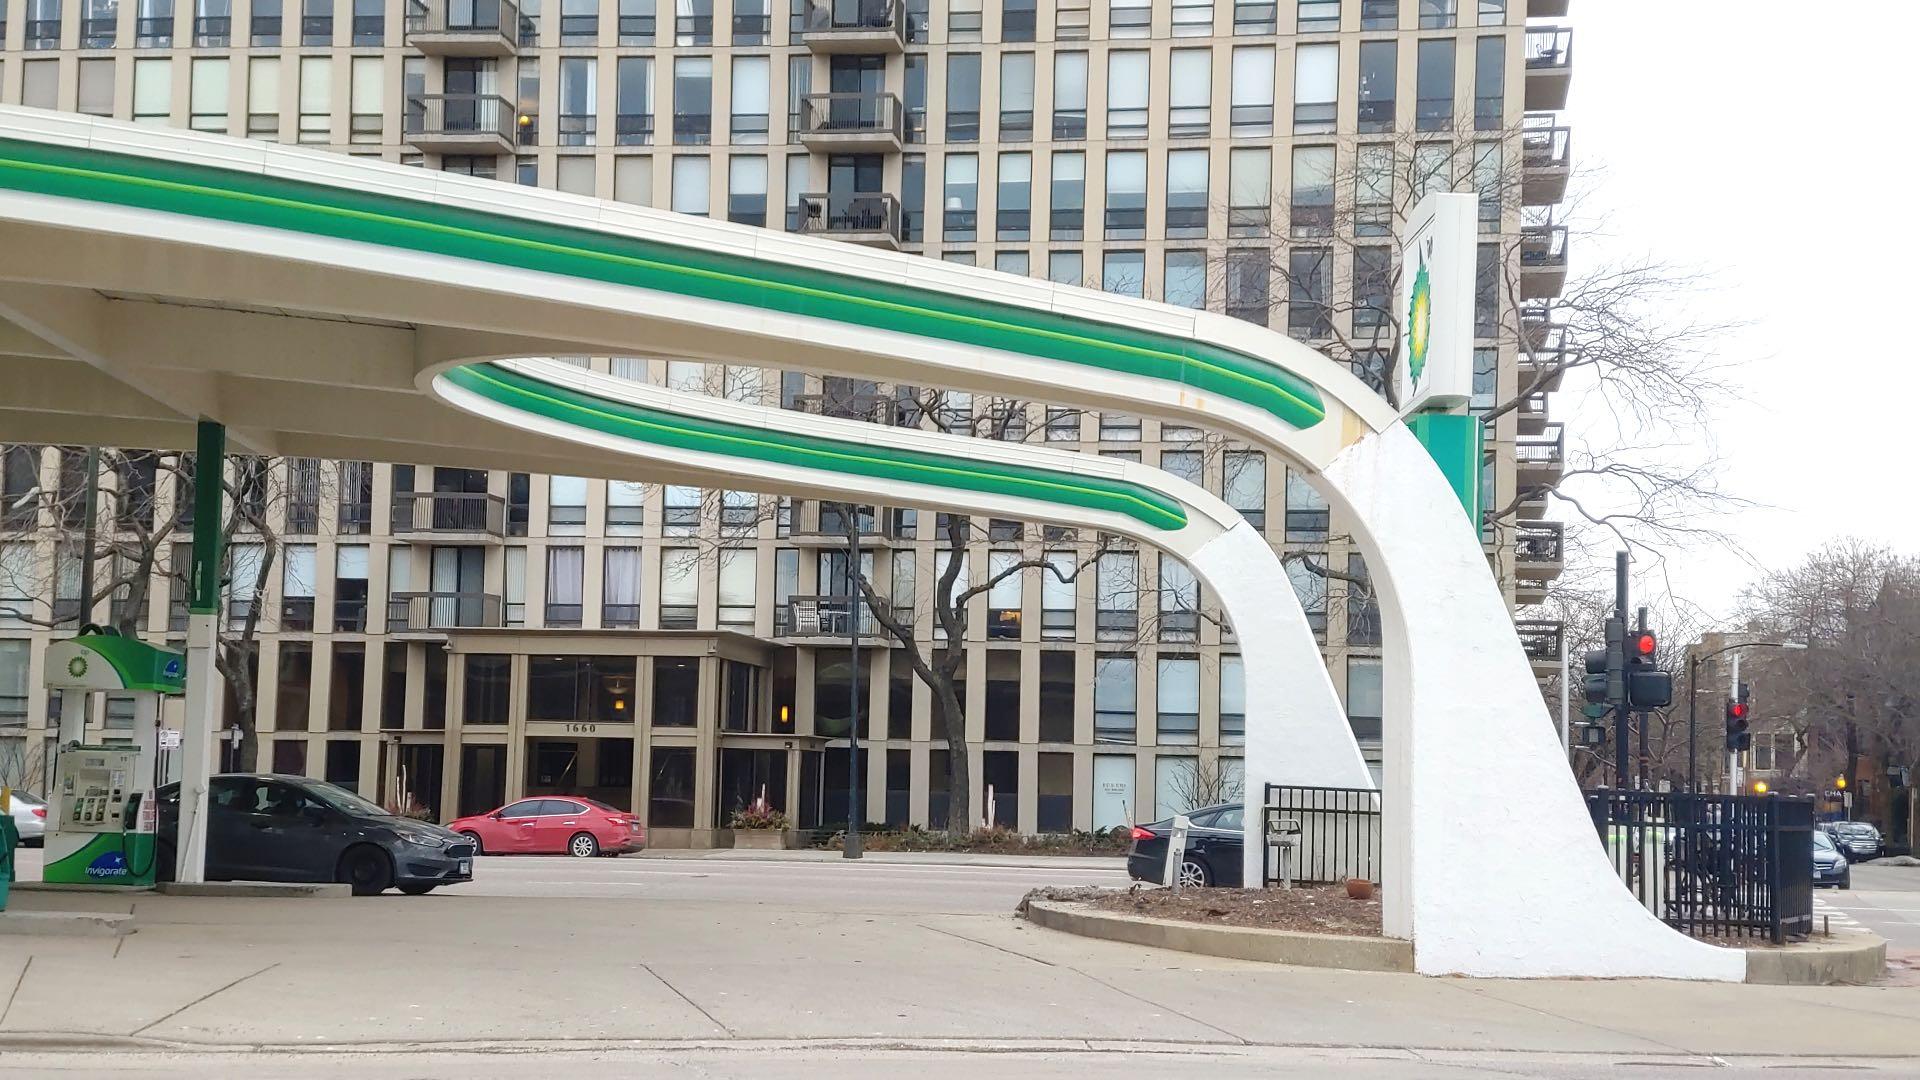 This unique BP service station in Old Town, dating to 1971, is threatened by potential expansion of the Moody Church campus. (Preservation Chicago / Ward Miller)